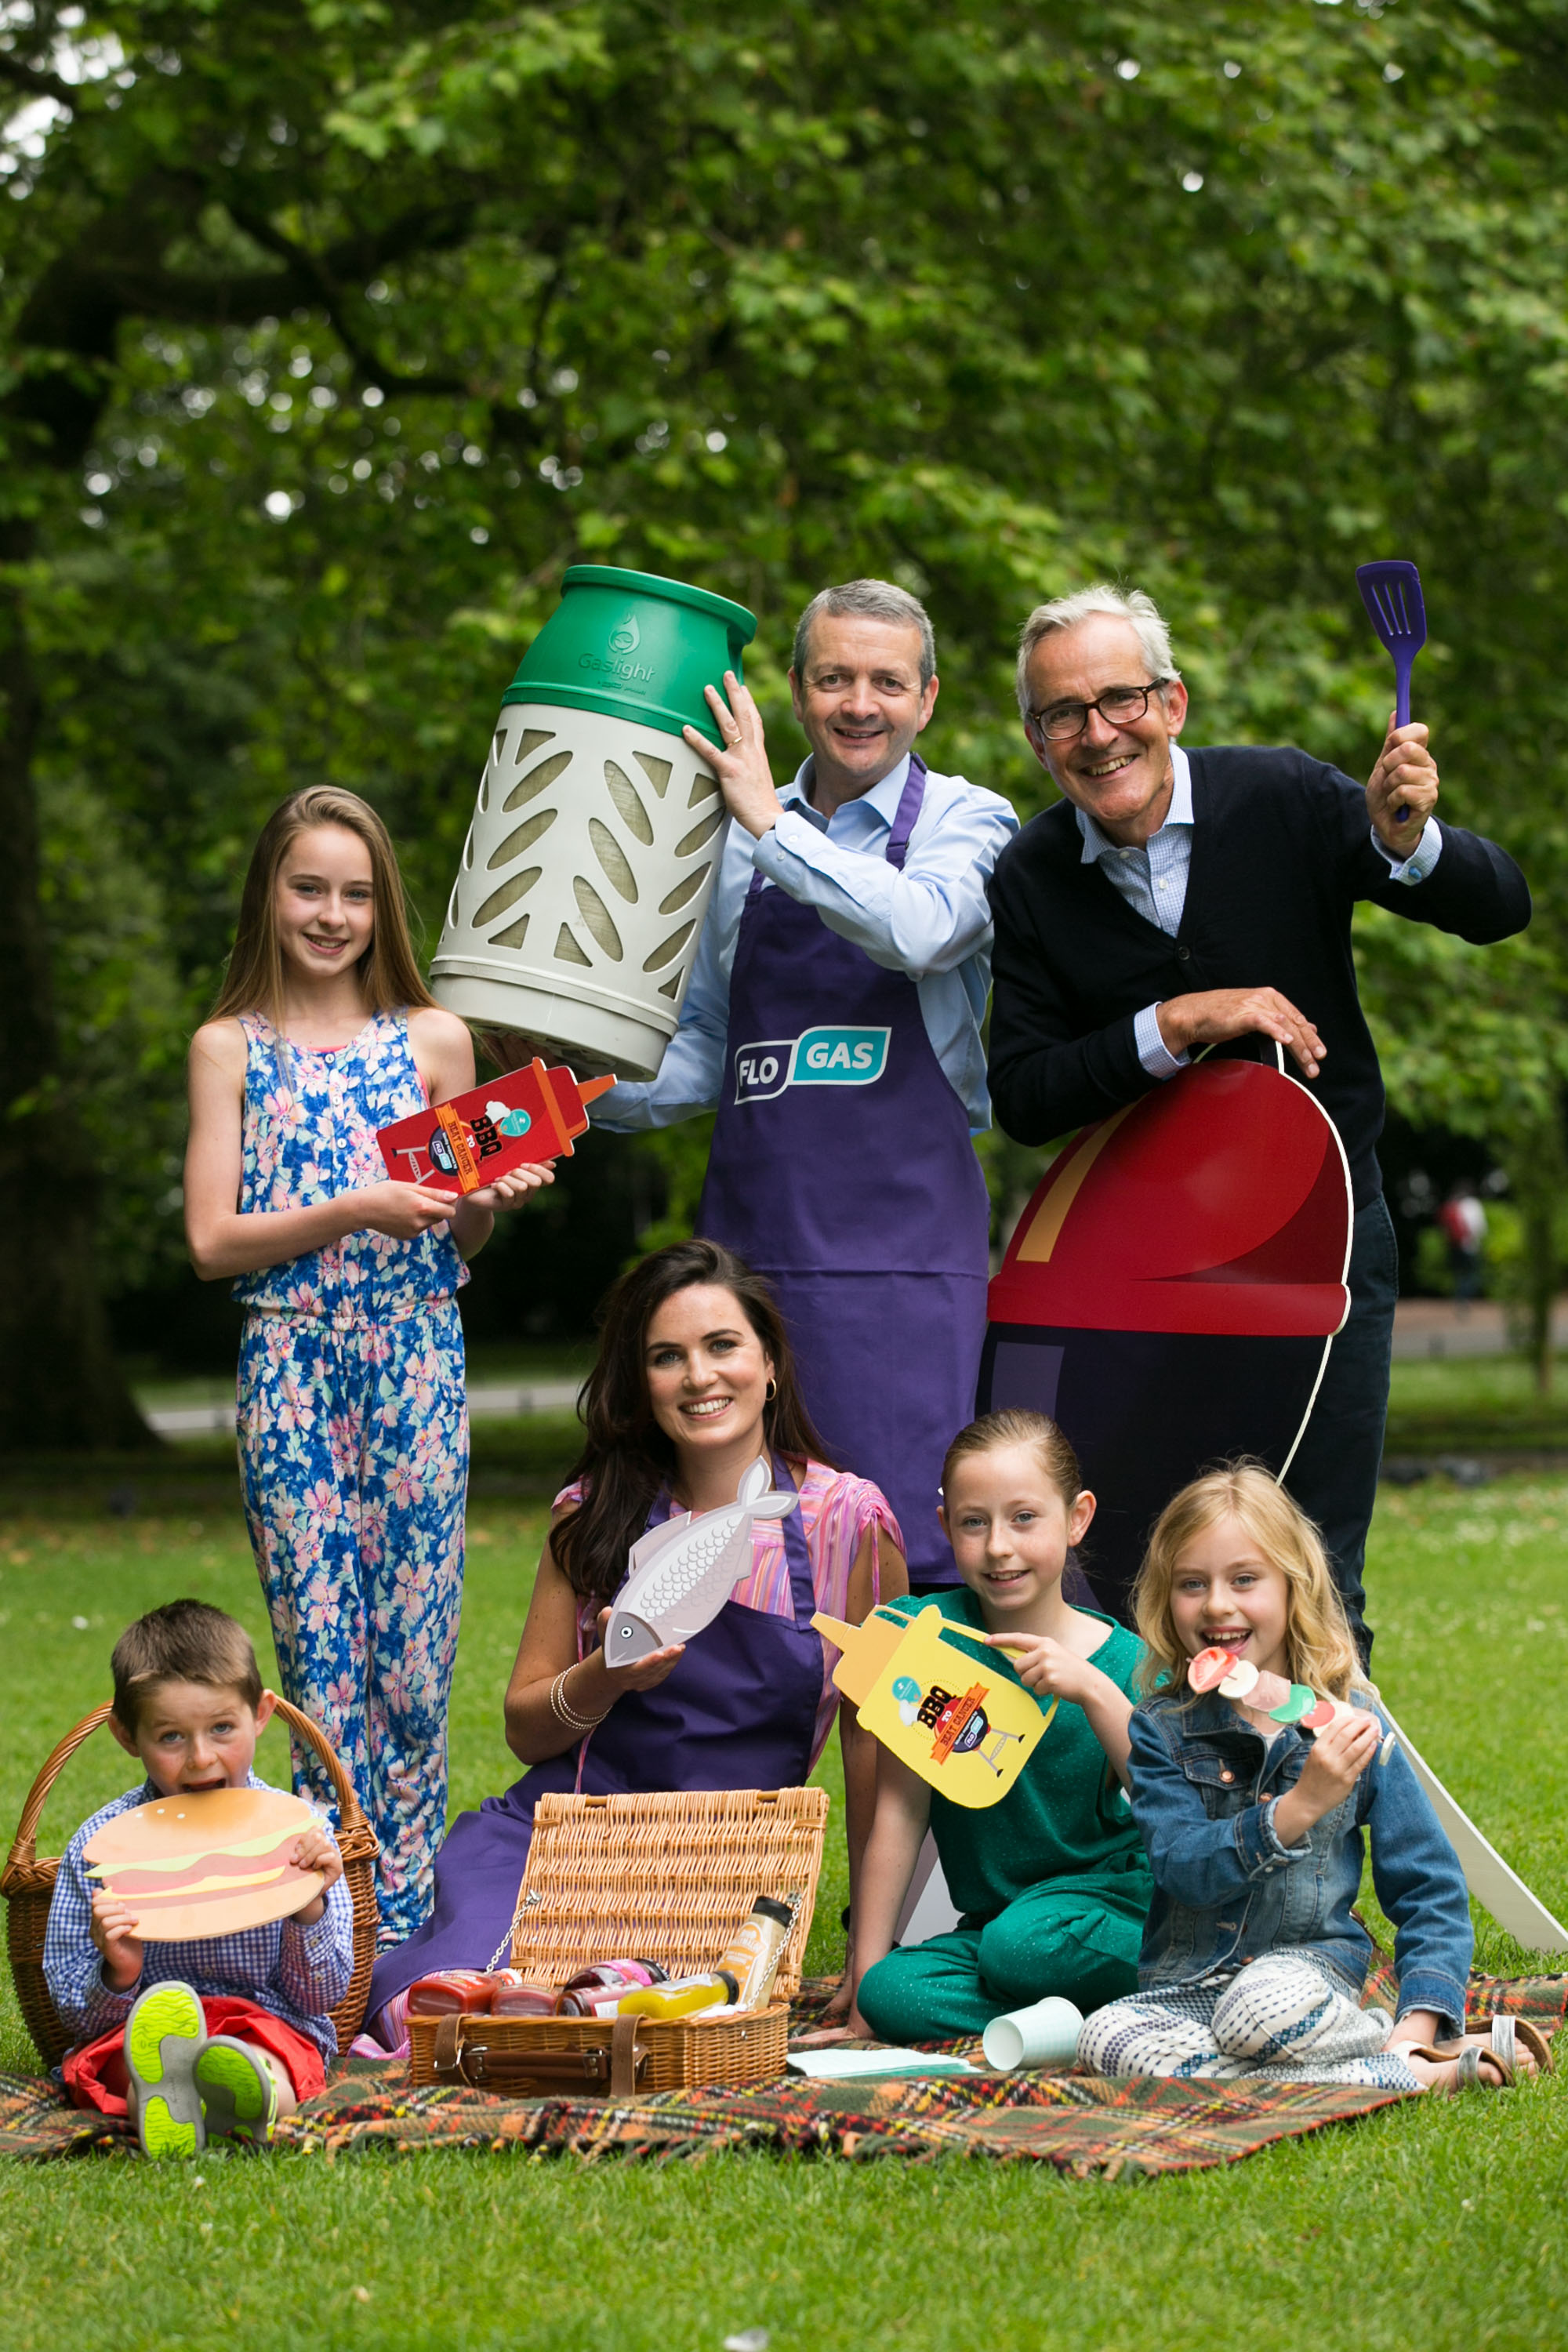 Be a BBQ Hero…Eoin O’Flynn, marketing manager, Flogas Ireland, TV chef Rory O’Connell and Grace Cox of Ballymaloe with some little helpers - Ryan, Robin, Eva and Alex Keating at the launch of the BBQ to Beat Cancer Campaign in aid of the Marie Keating Foundation